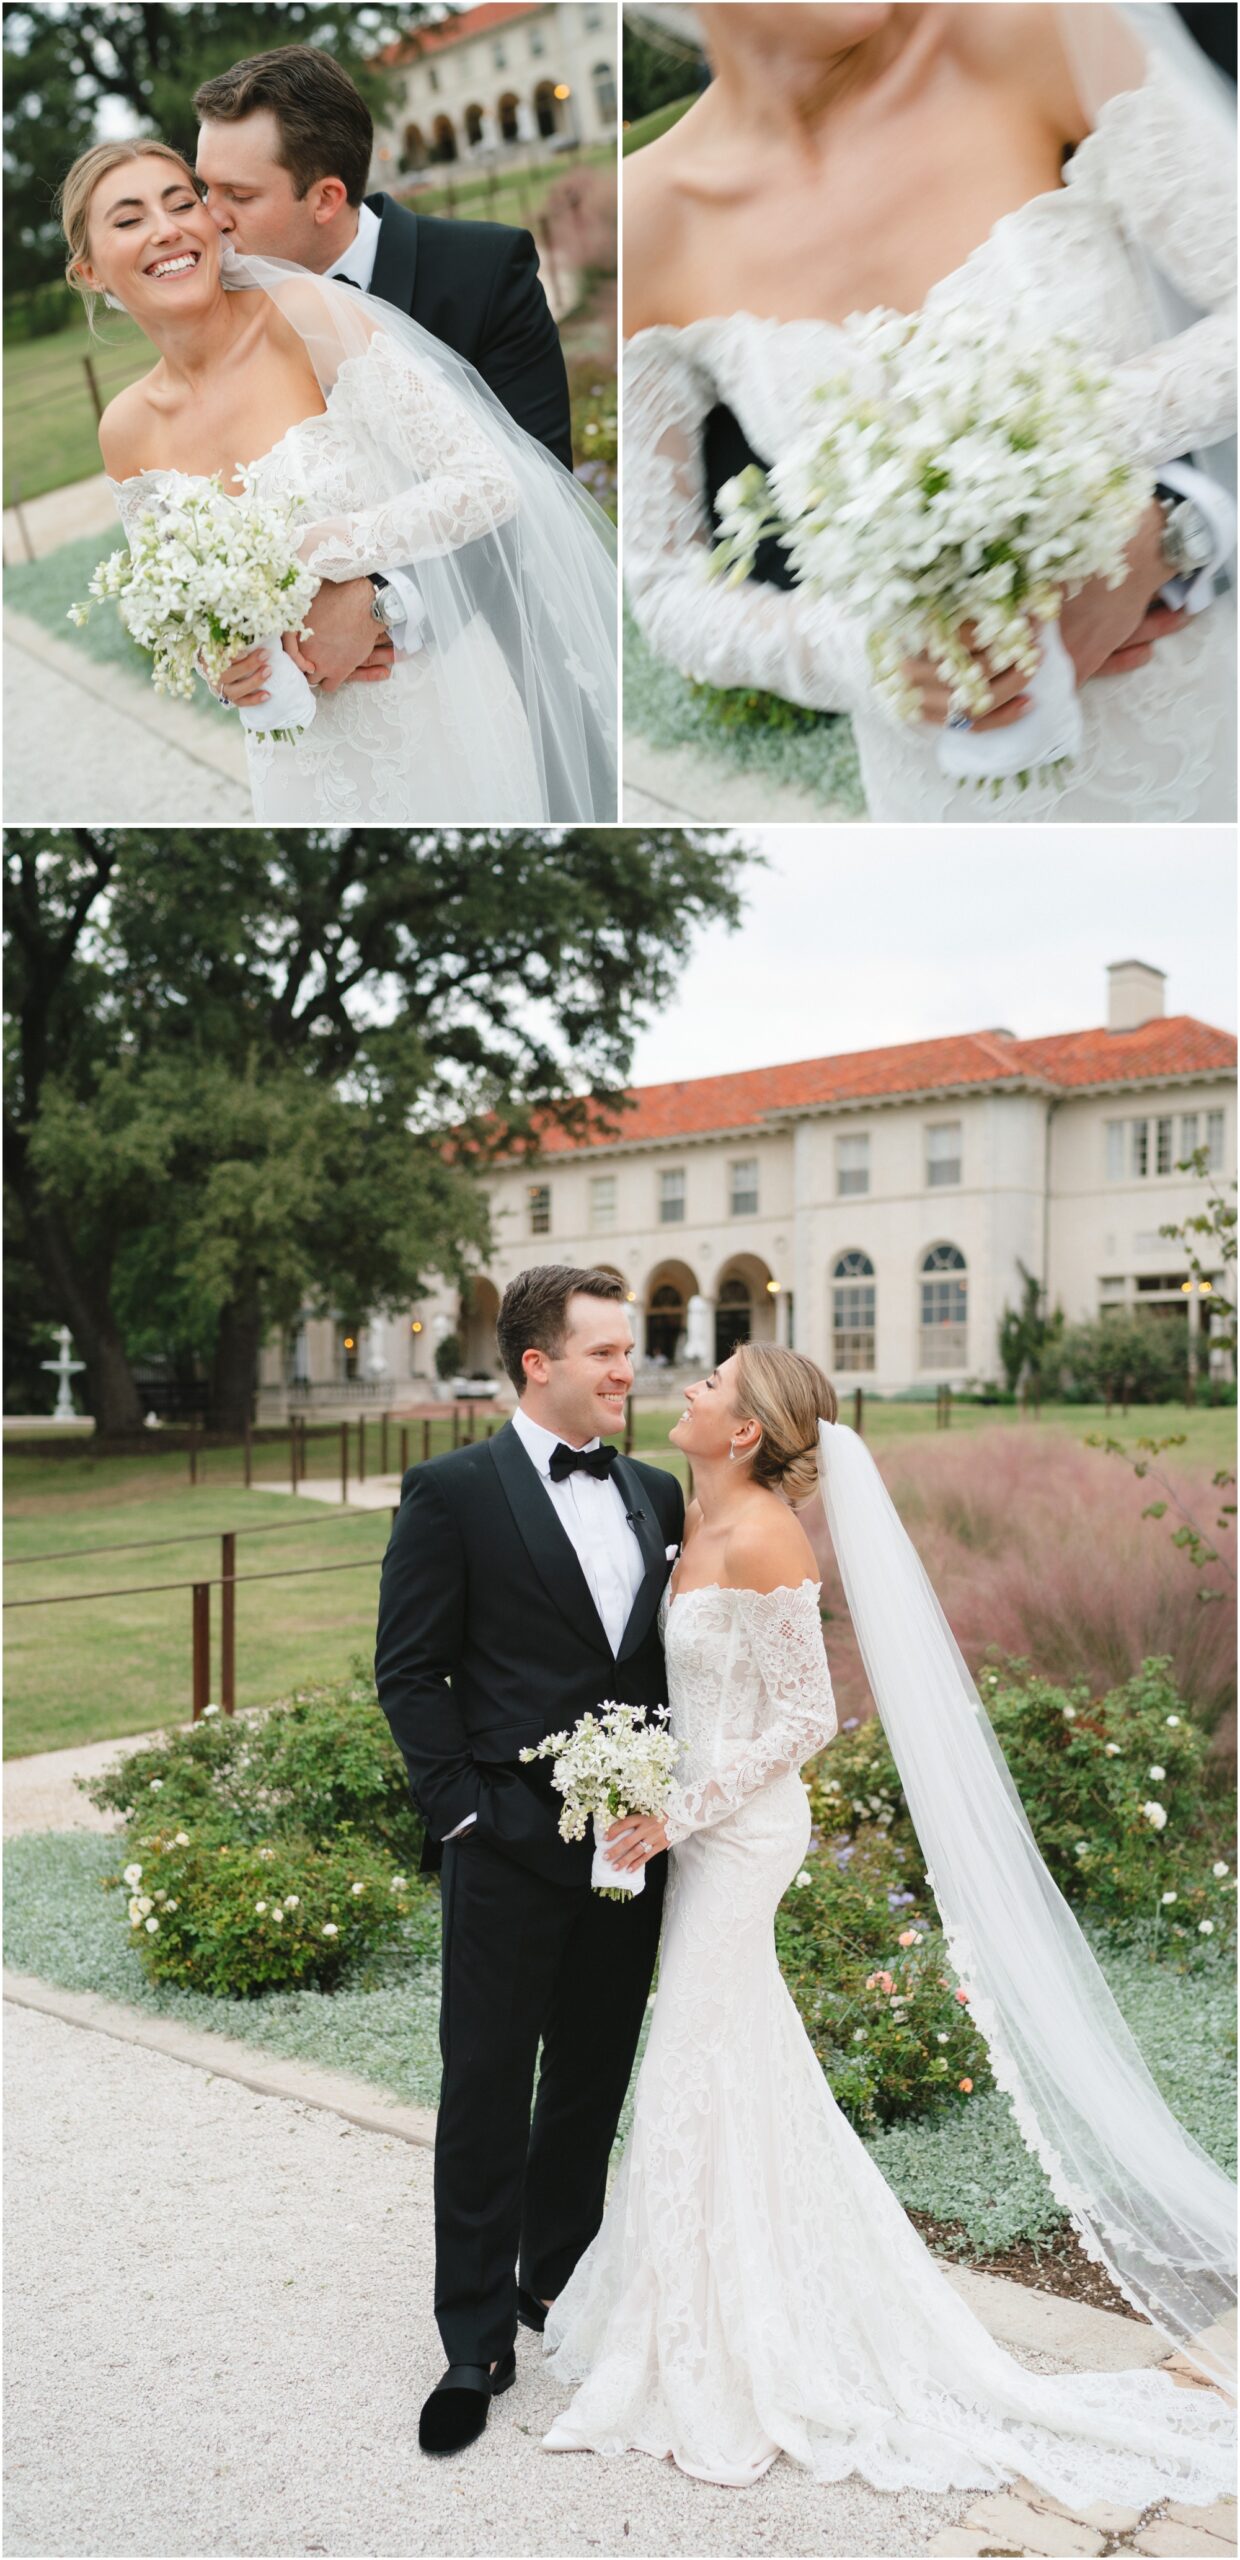 just married portraits at a wedding at commodore perry estate in austin texas